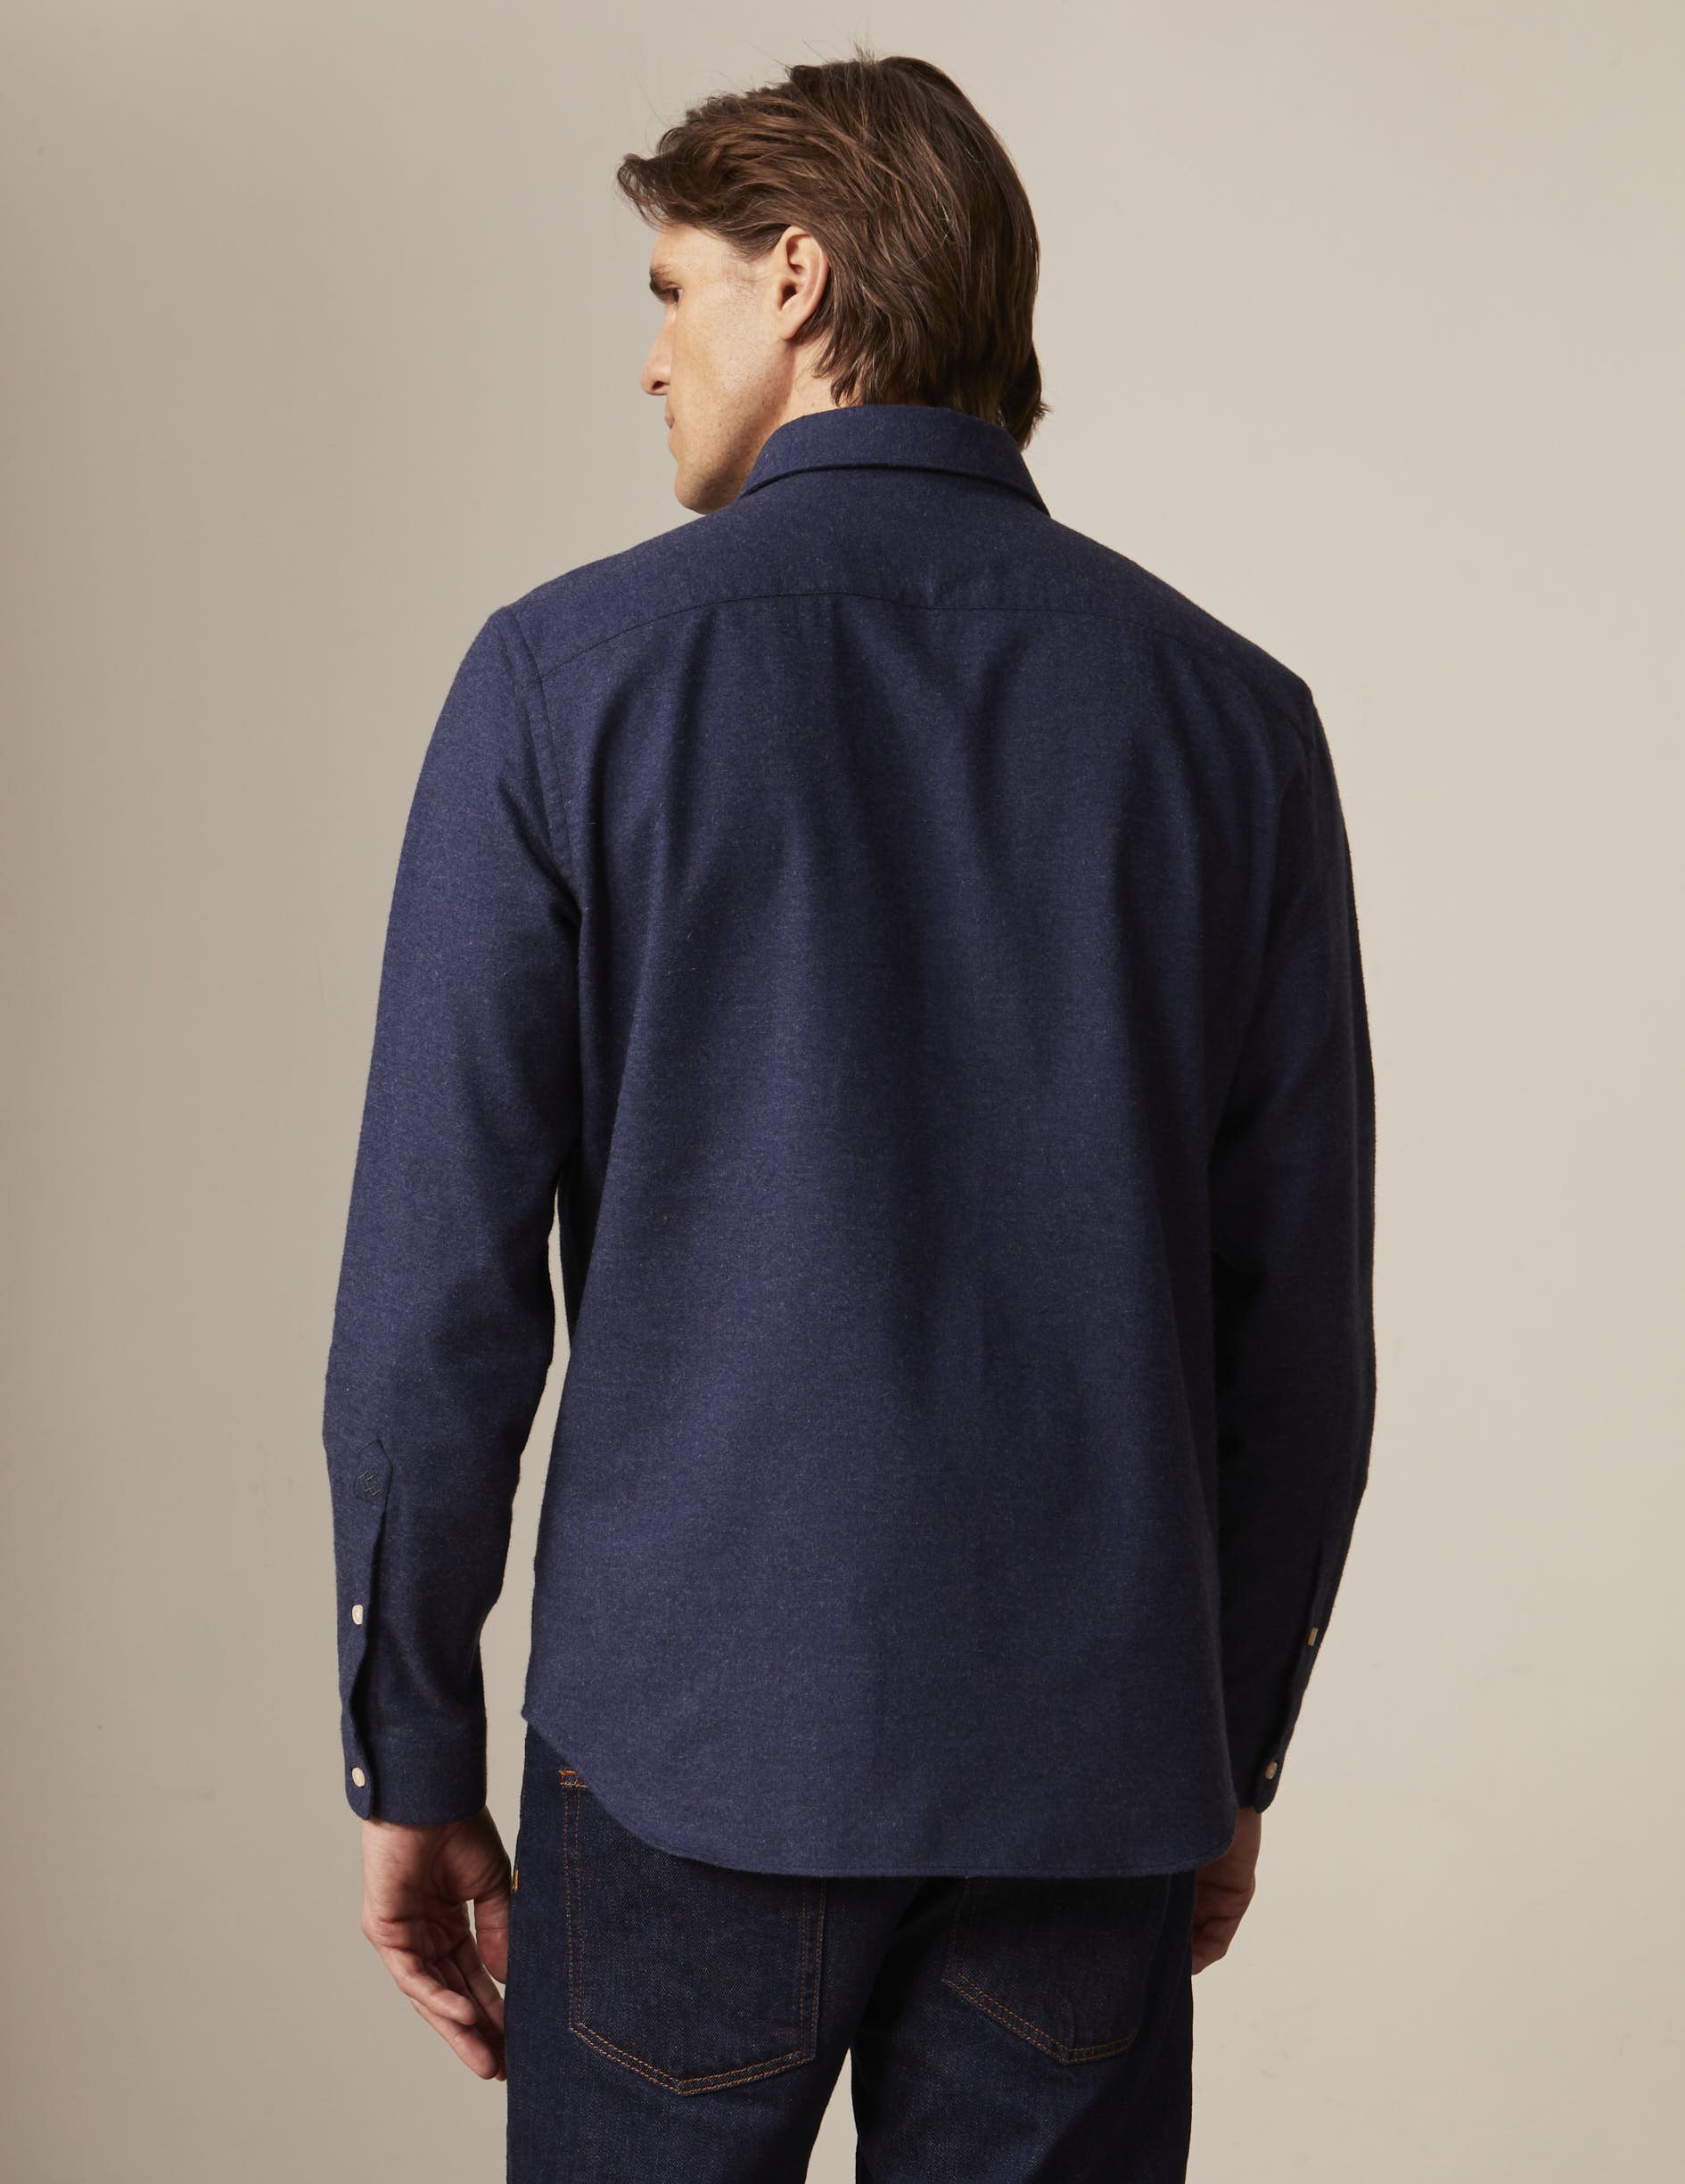 Navy cotton cashmere Auguste shirt - Flannel - French Collar